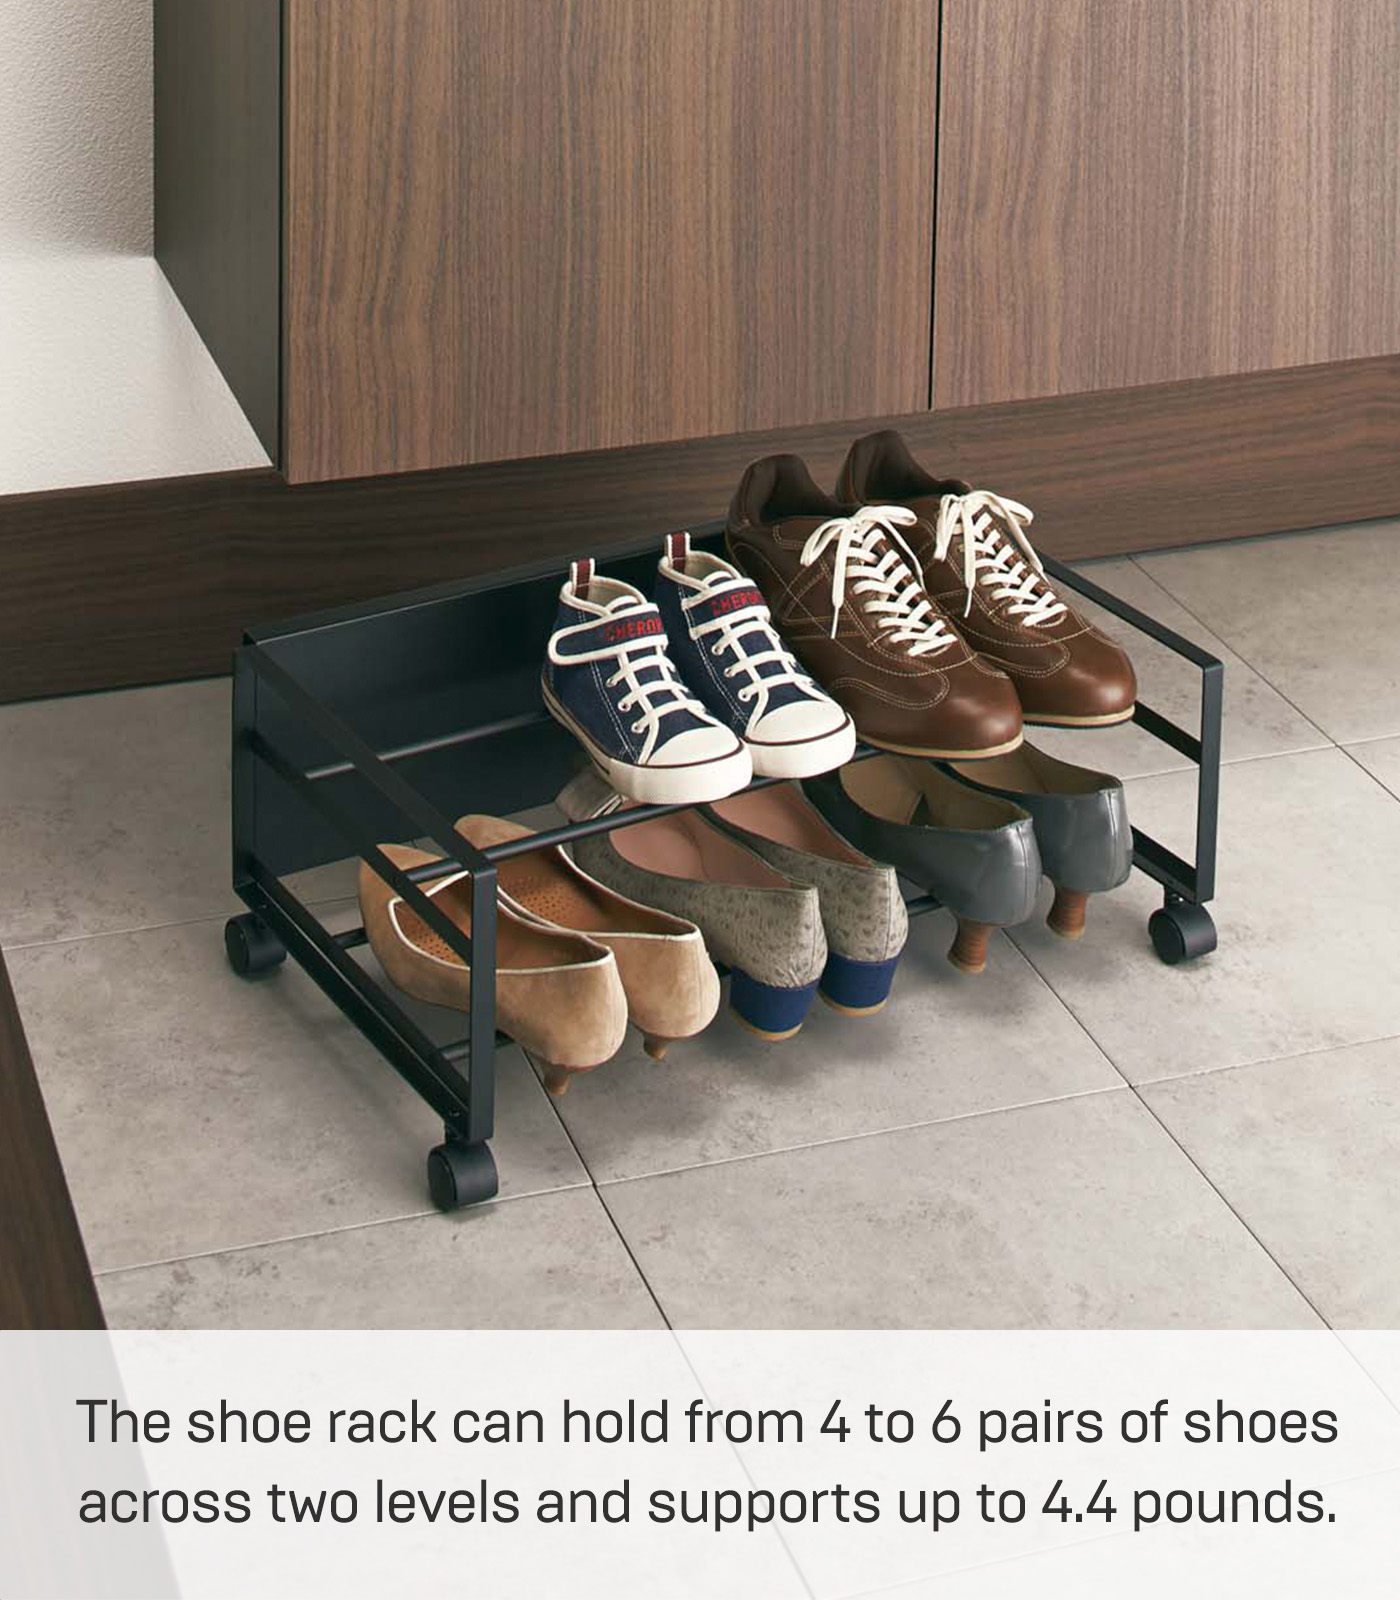 Yamazaki Home Rolling Shoe Rack, Black, Steel,  Holds 4 shoes, 6 heels, Supports 4.4 pounds, Wheels, Minimal Assembly - image 2 of 5